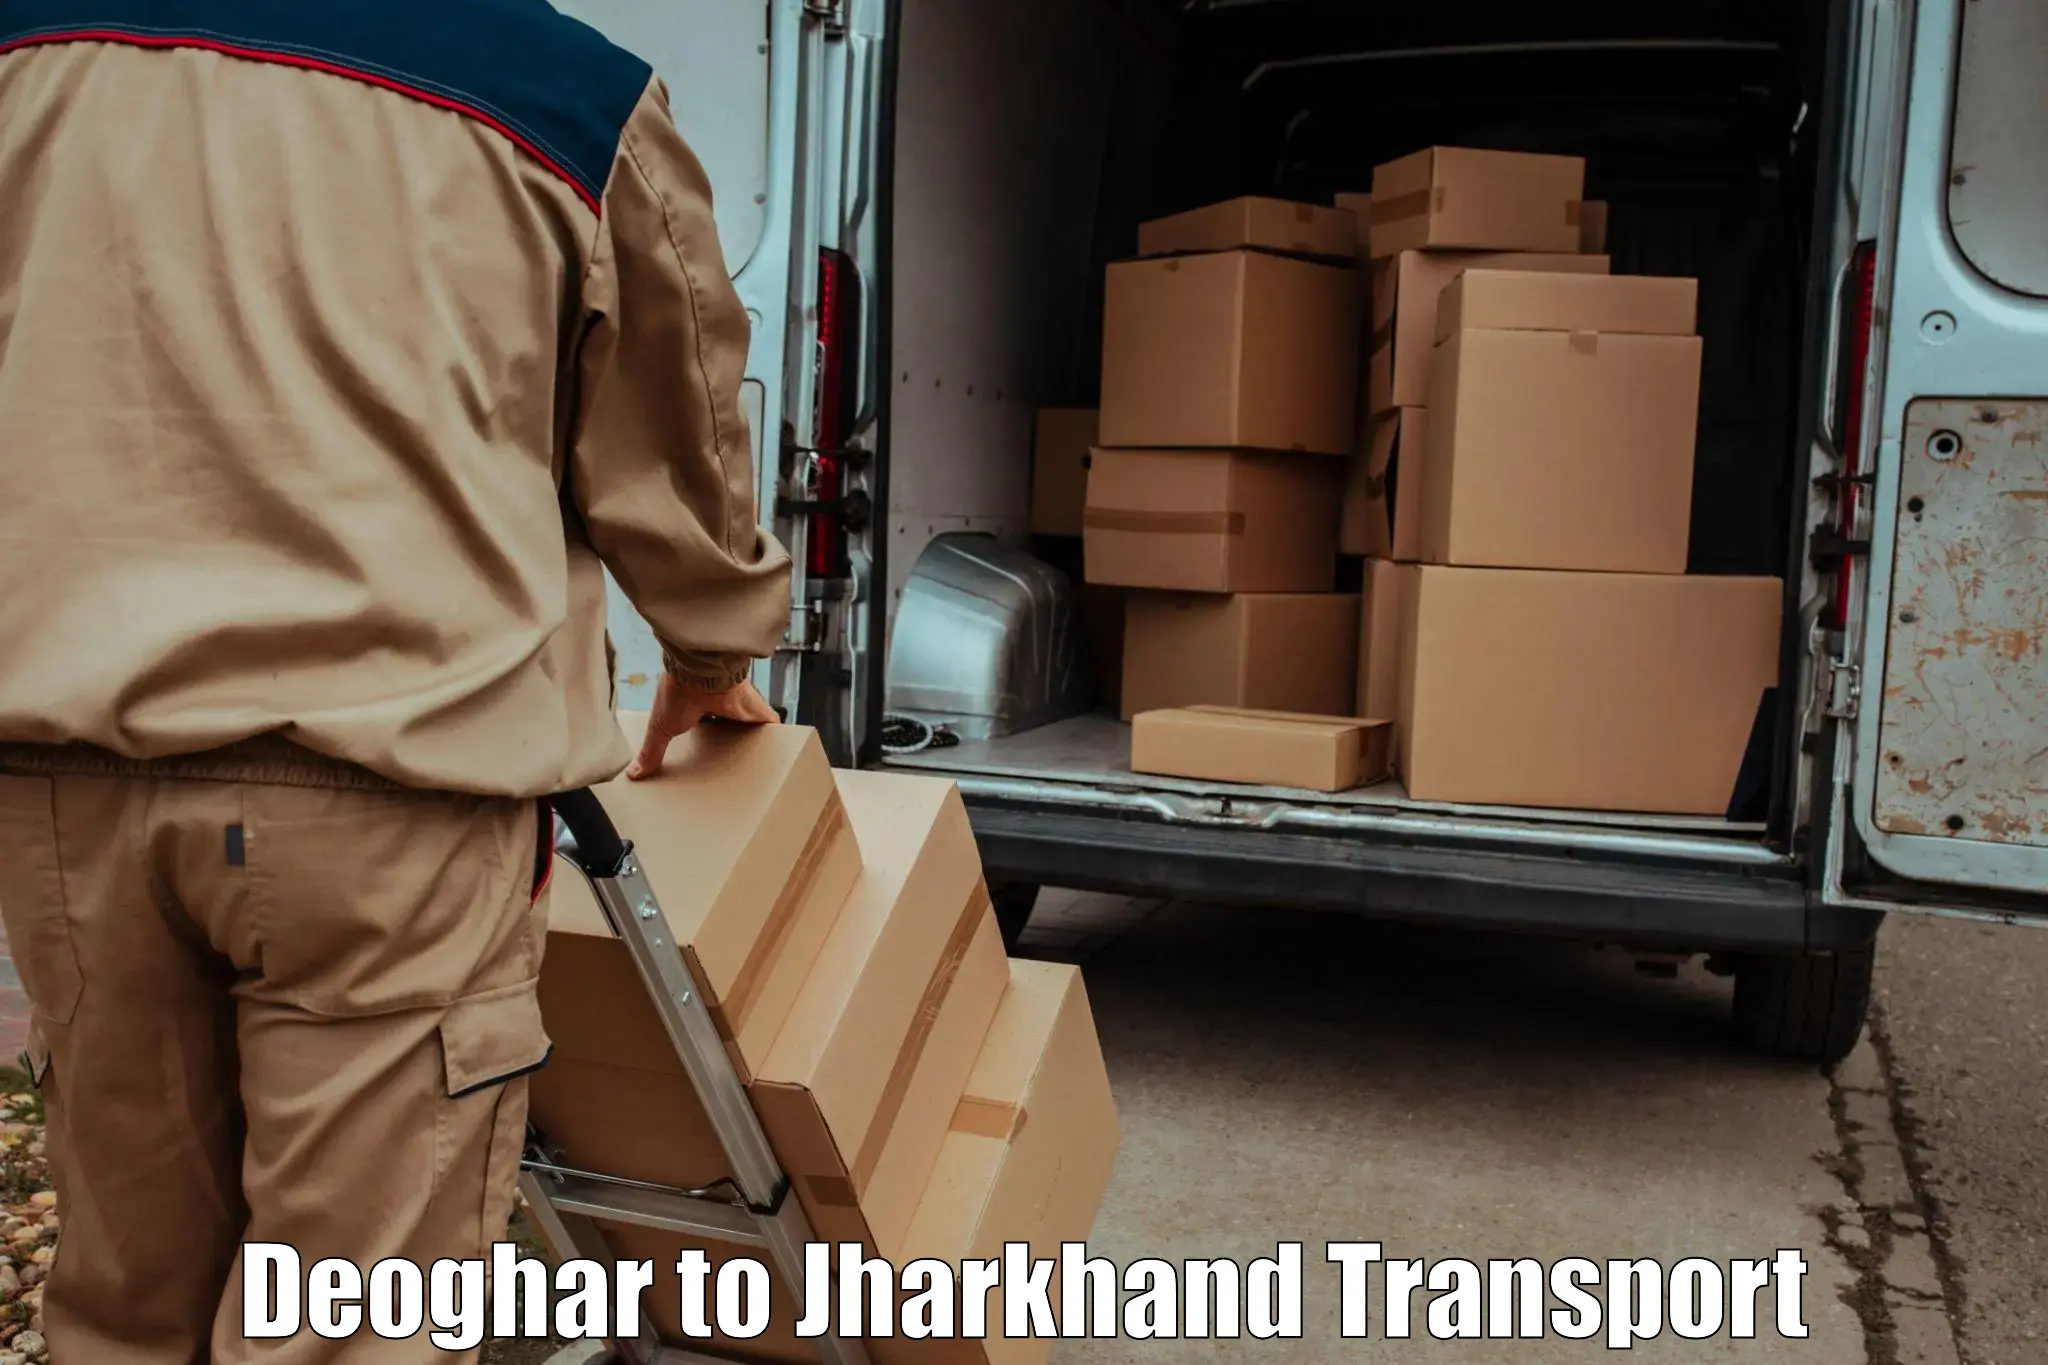 Delivery service Deoghar to Jharkhand